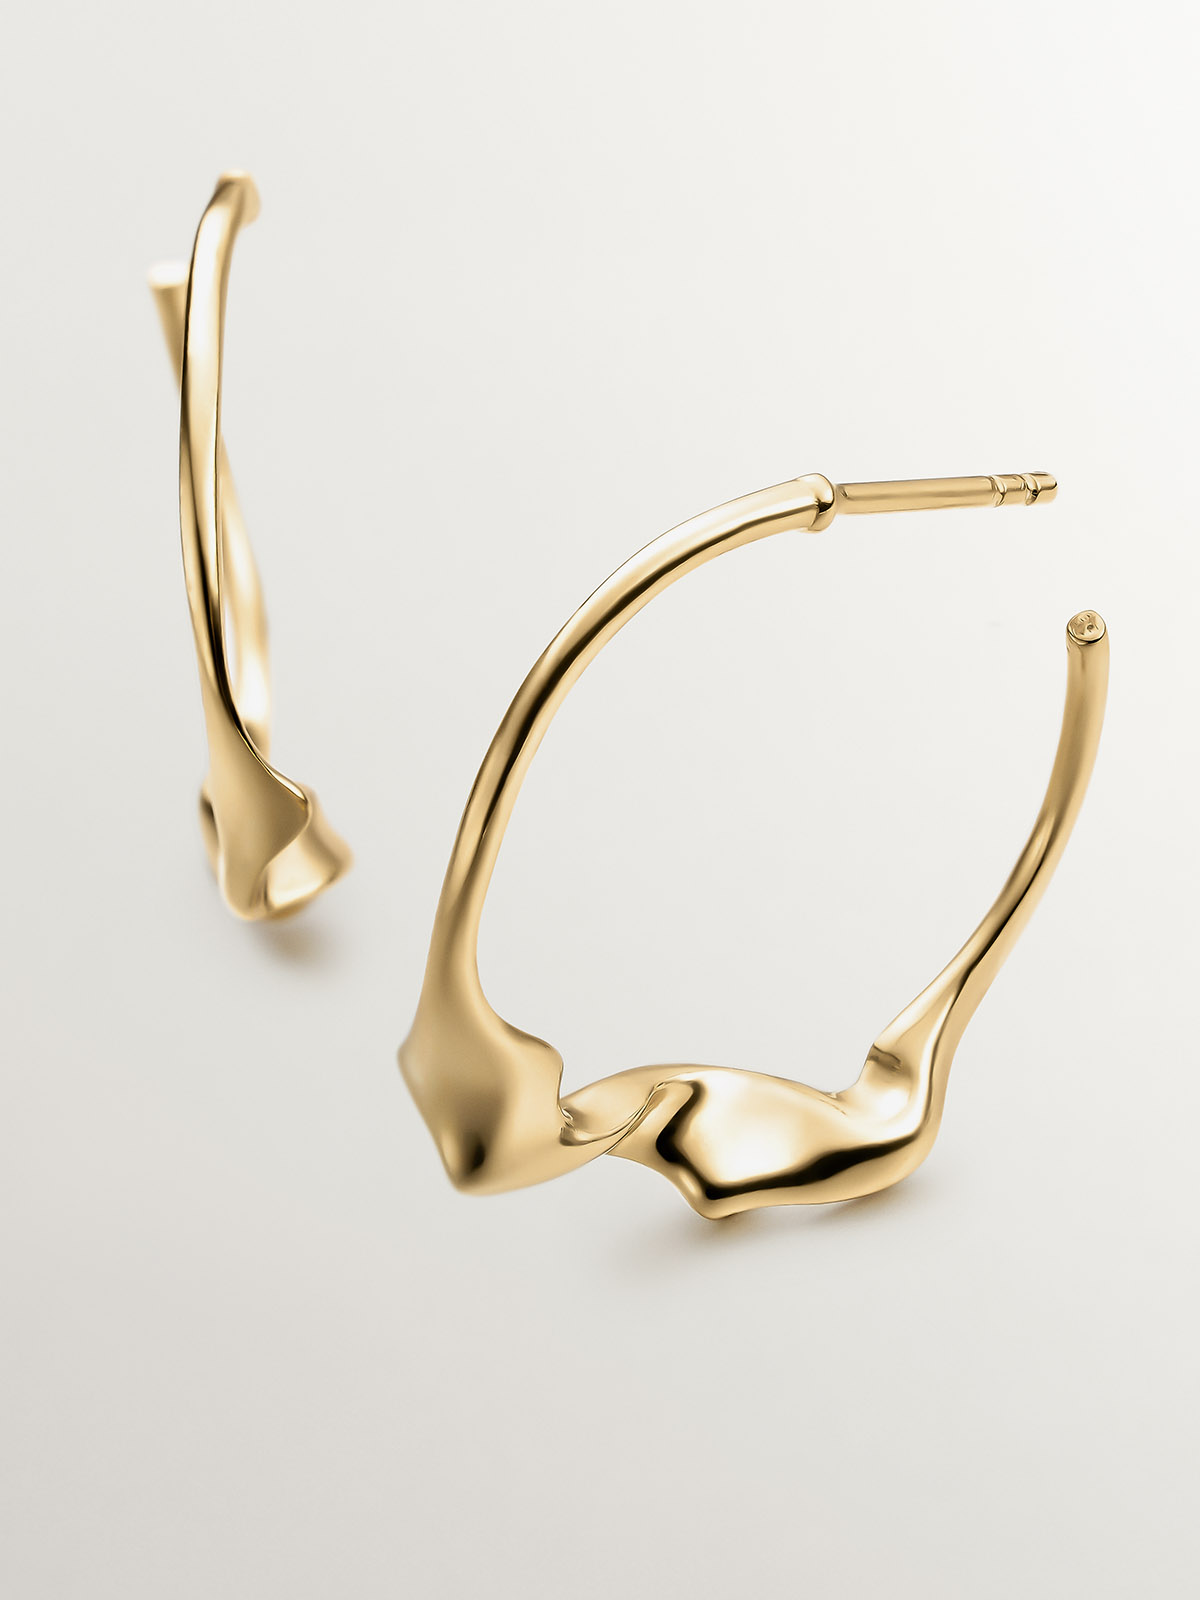 Large irregular hoop earrings made of 925 silver covered in 18K yellow gold